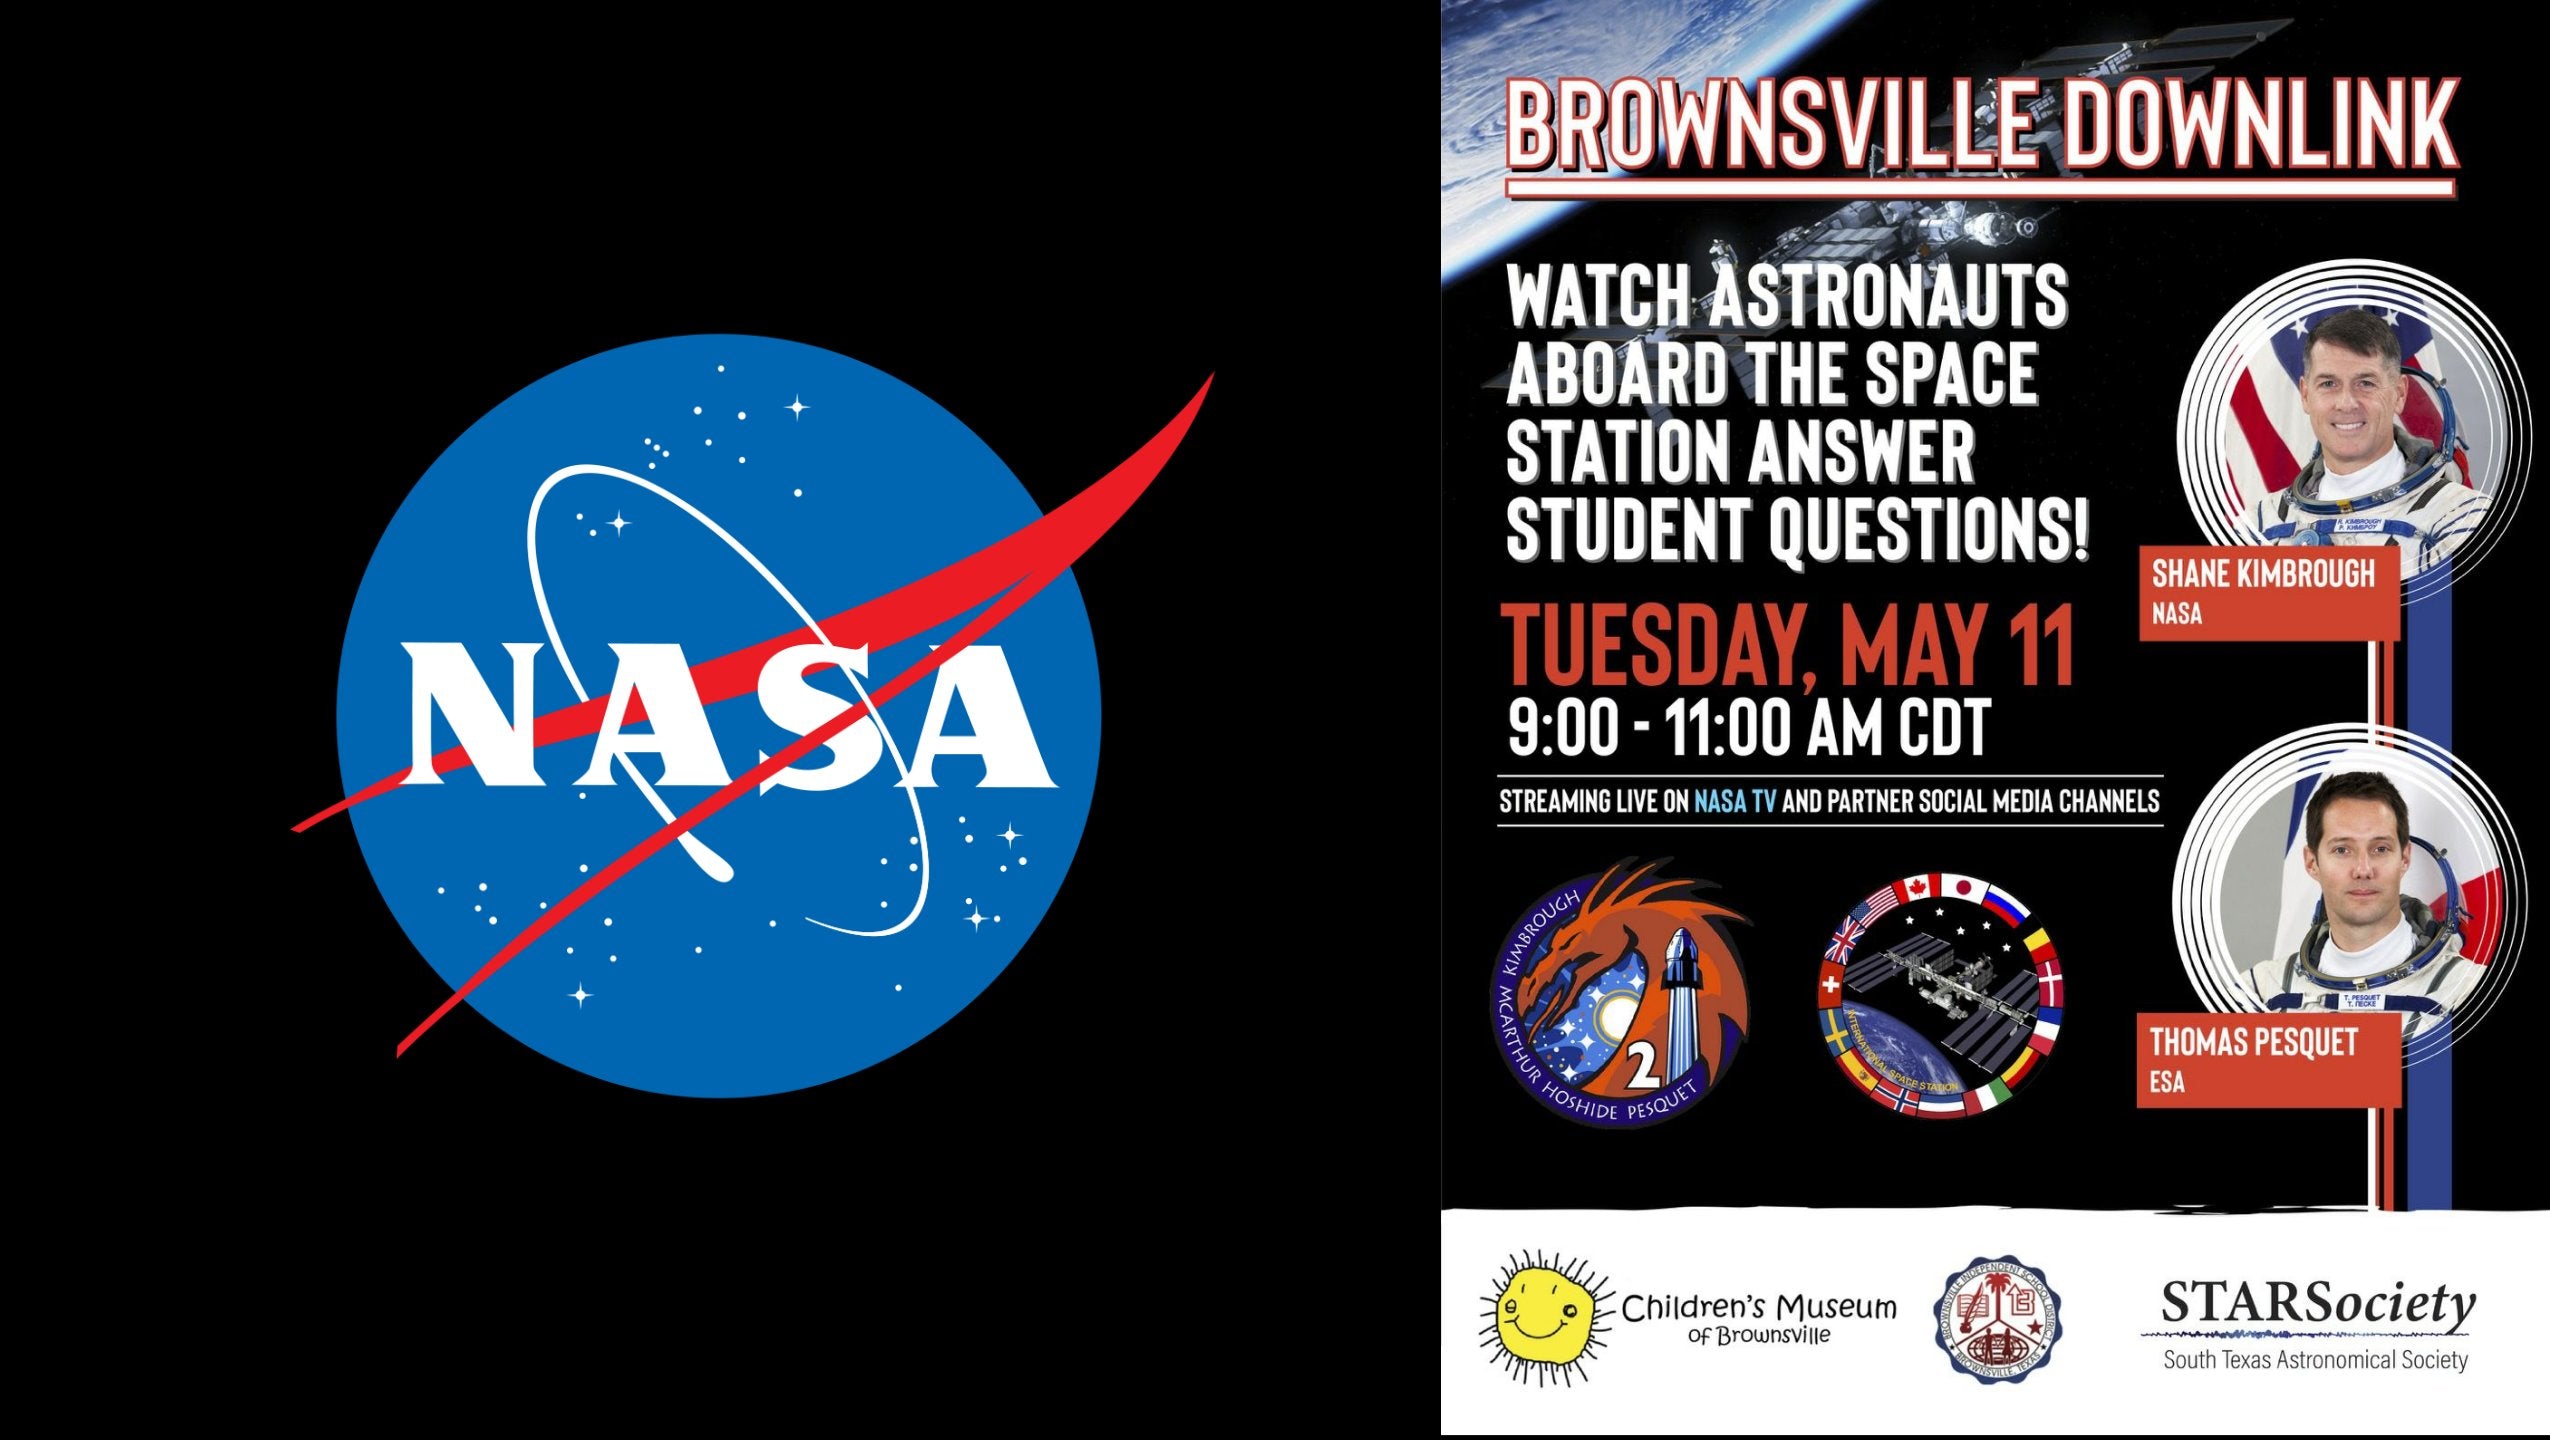 SpaceX Crew-2 Astronauts At The Space Station Will Answer Brownsville Texas Students Questions